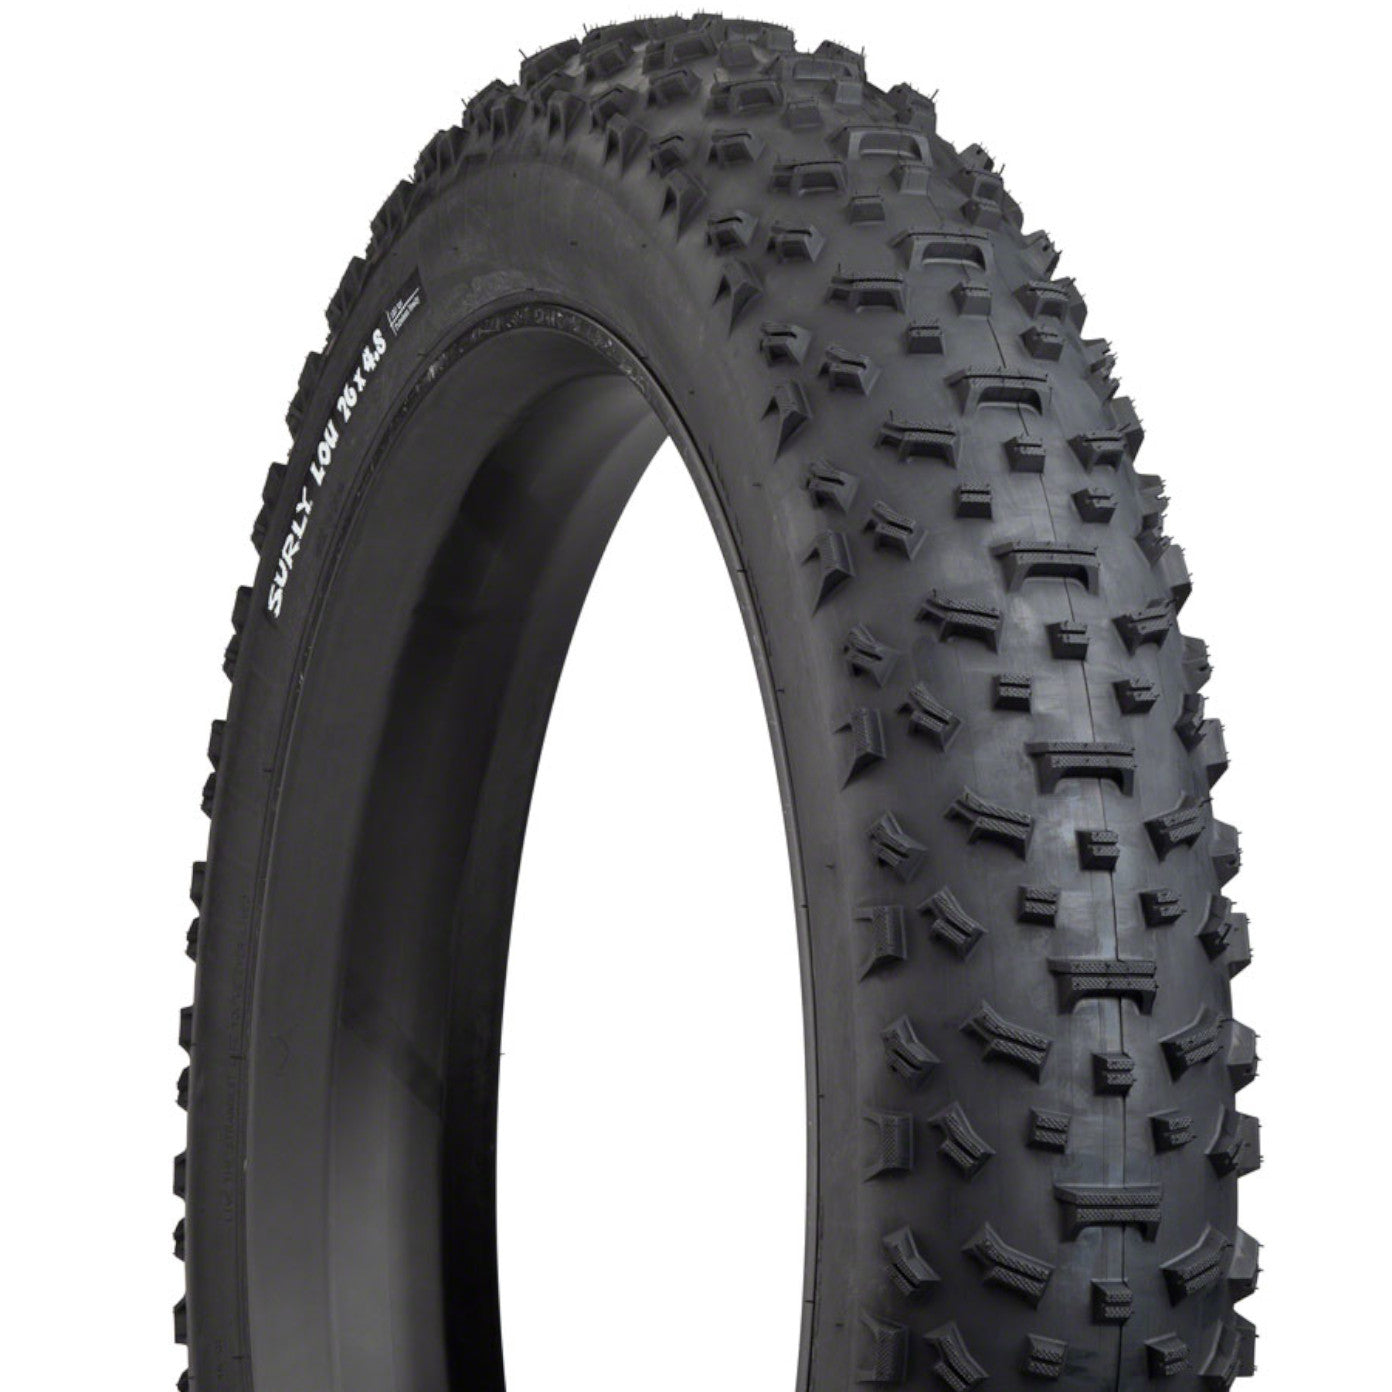 New Surly Bud or Lou 26 x 4.8 Folding Tubeless Ready Fat Bike Tire - The Bikesmiths